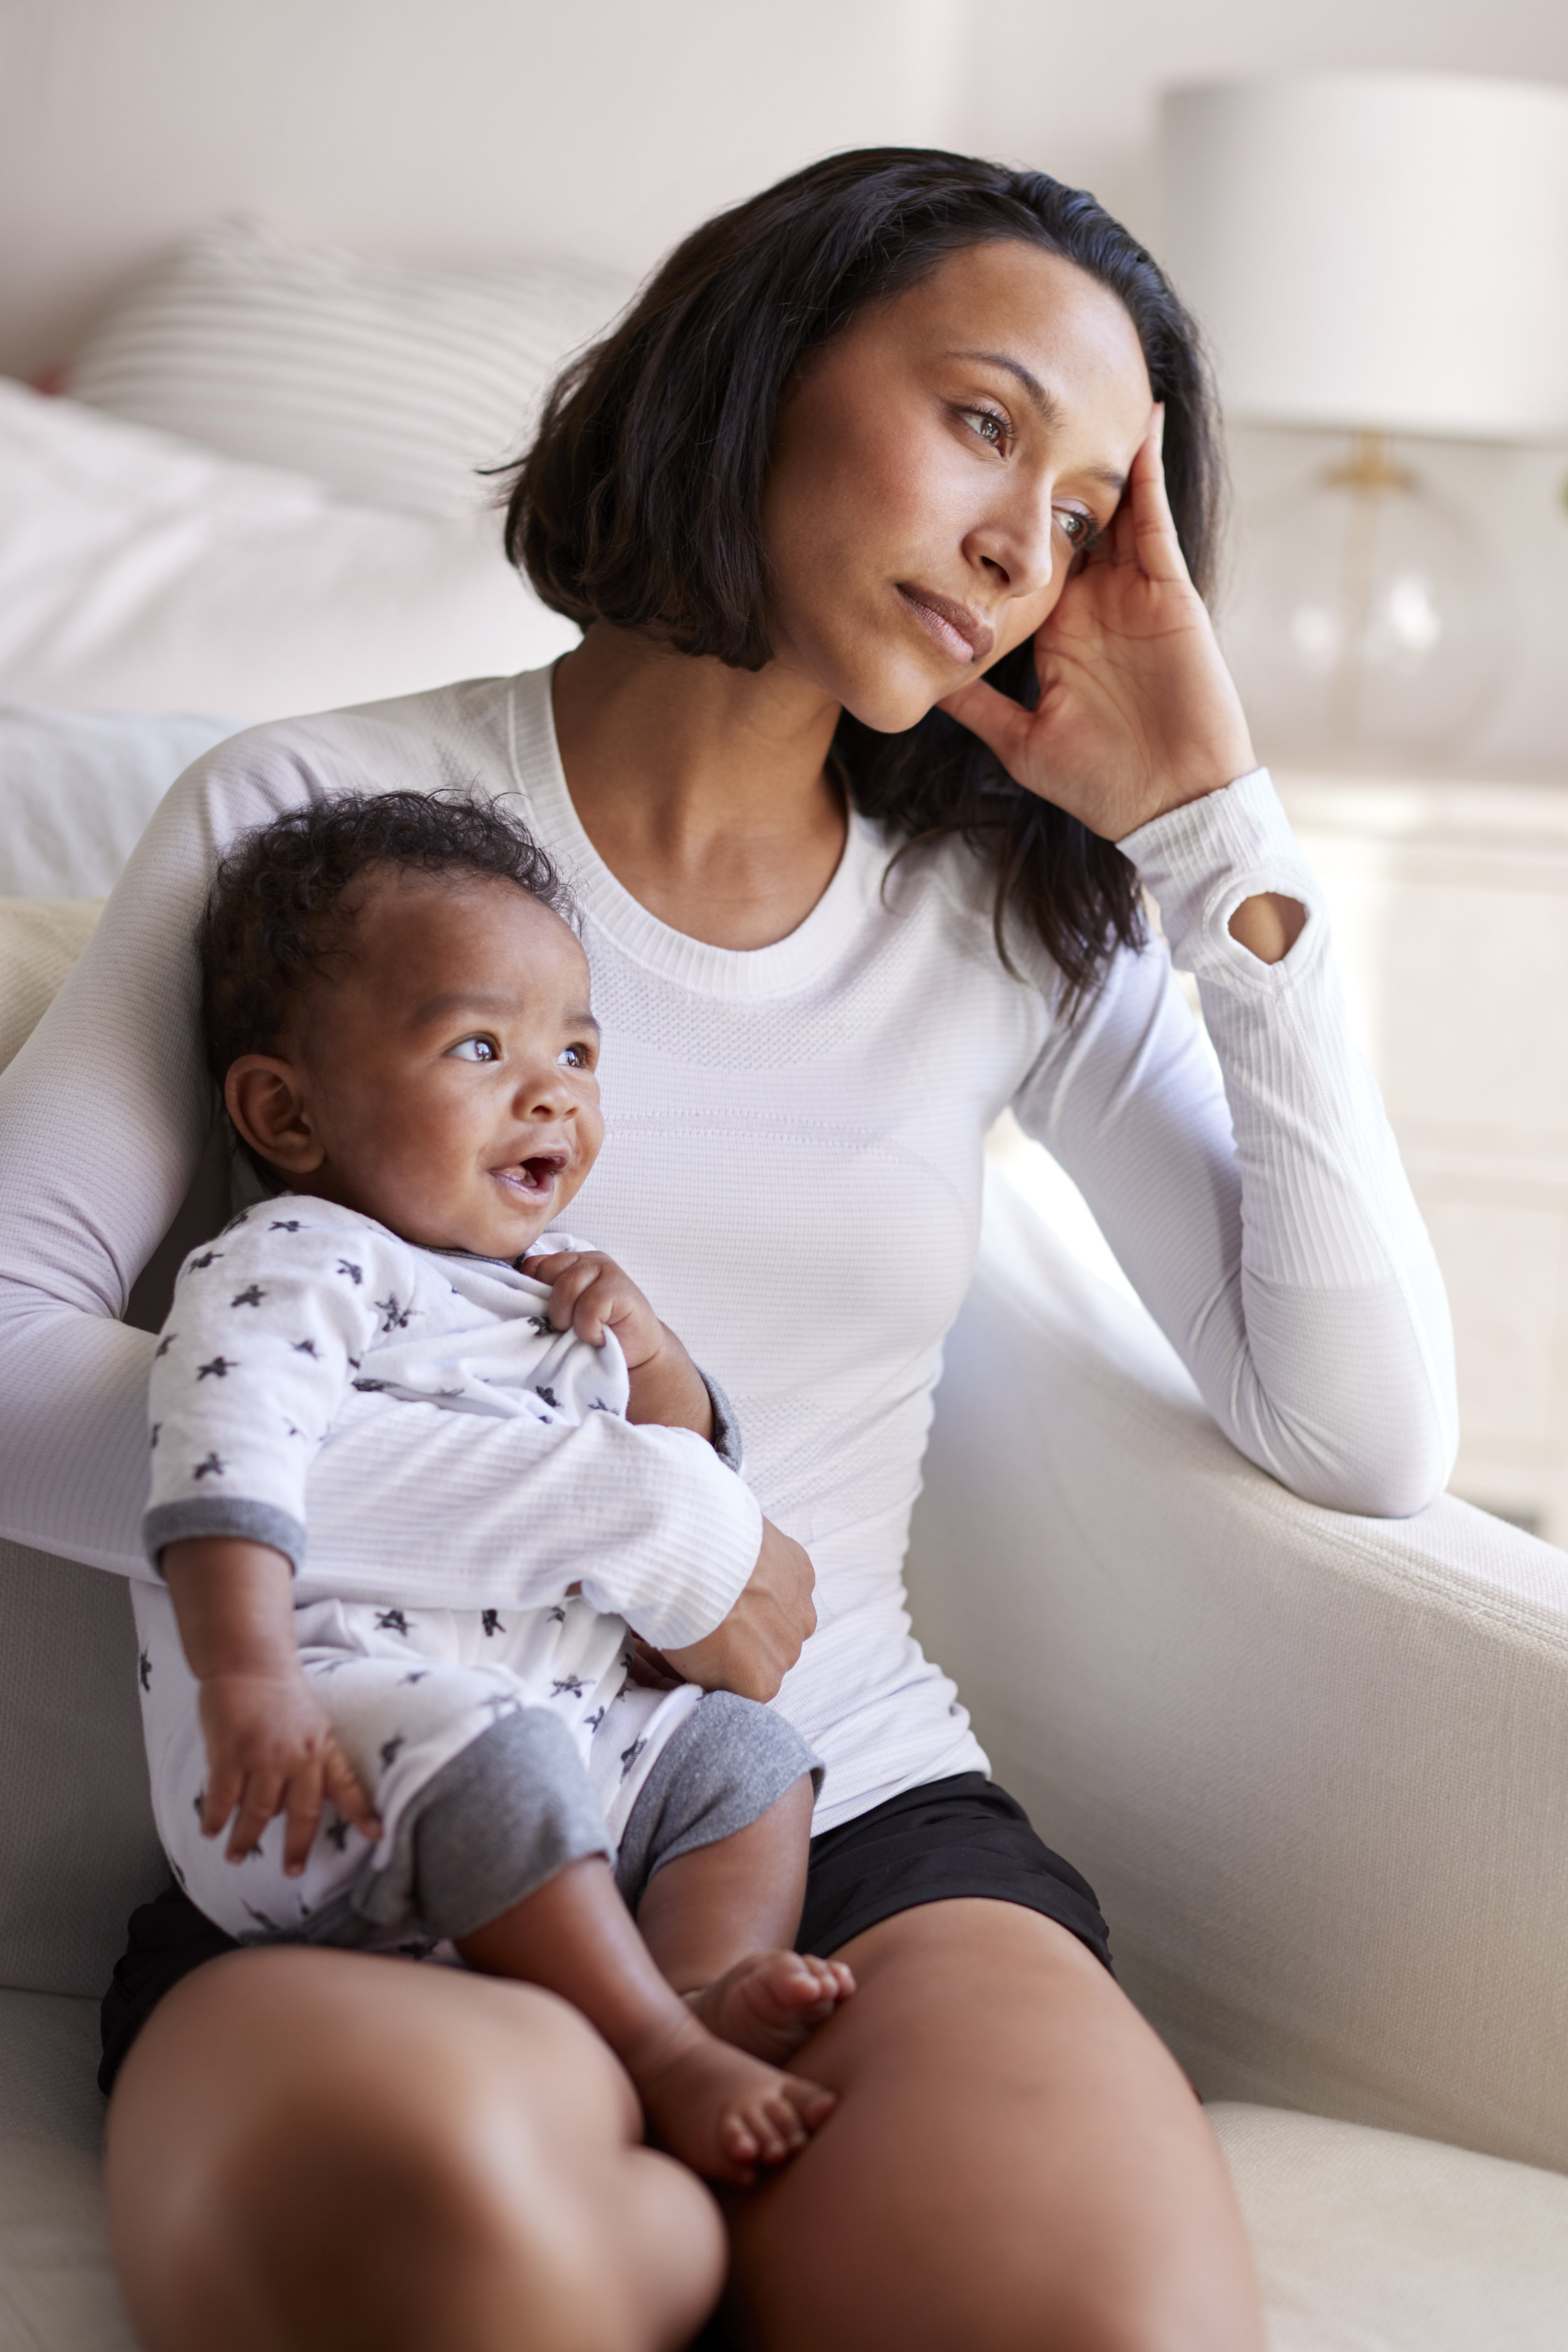 Dealing with Postpartum Depression and Anxiety